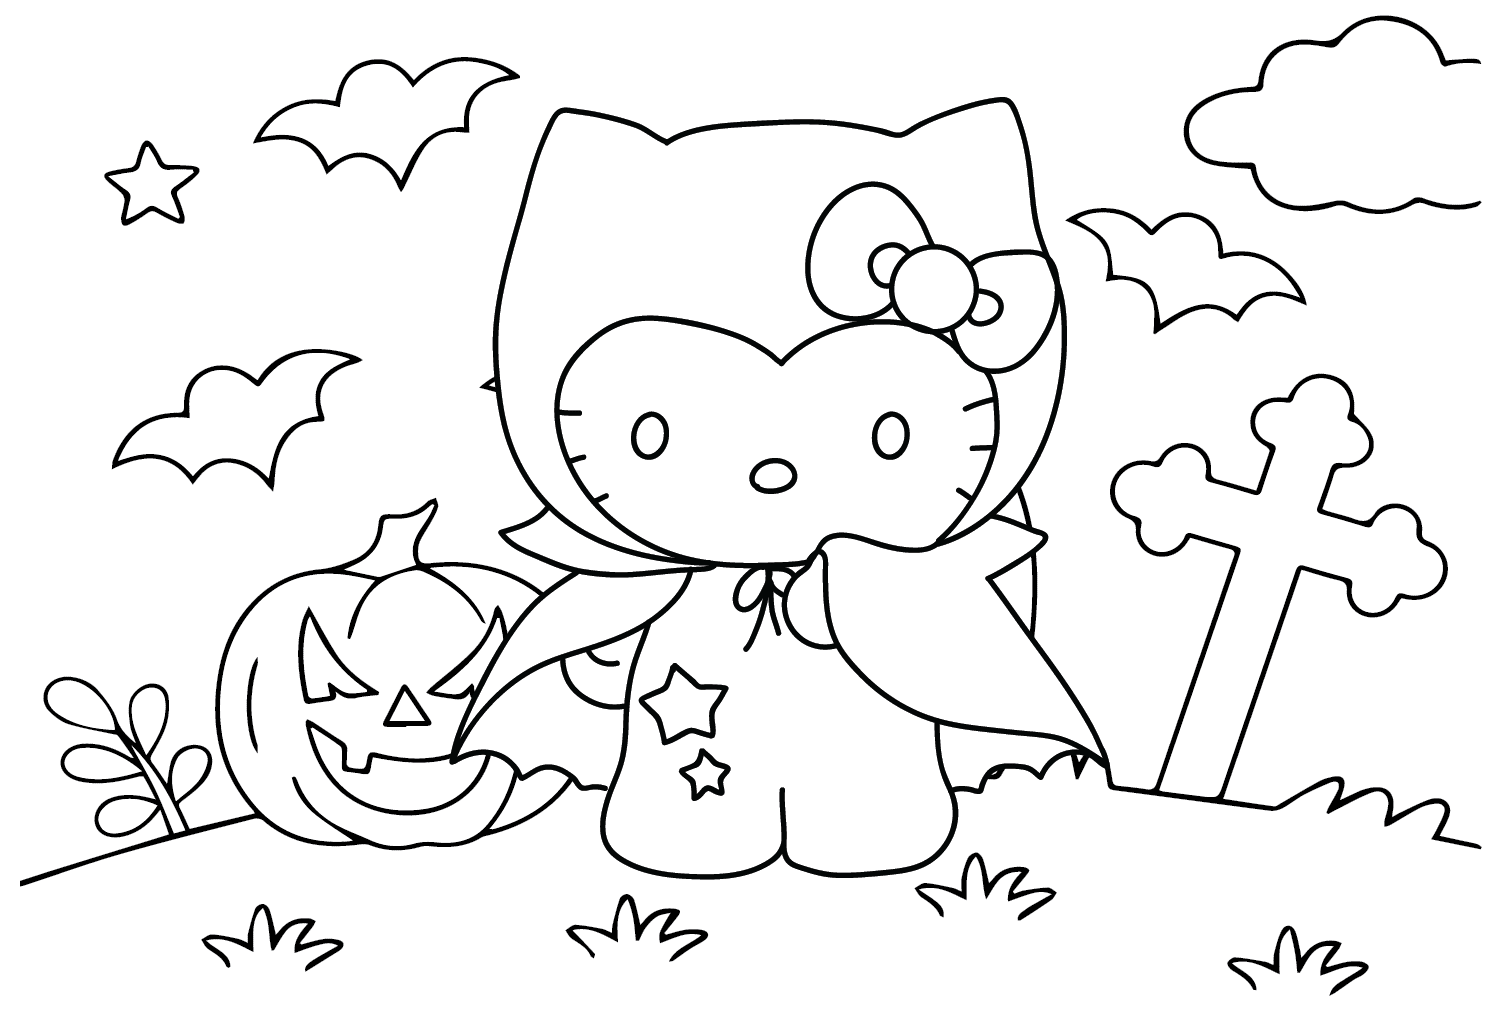 Free Hello Kitty Halloween Coloring Page from Halloween Hello Kitty